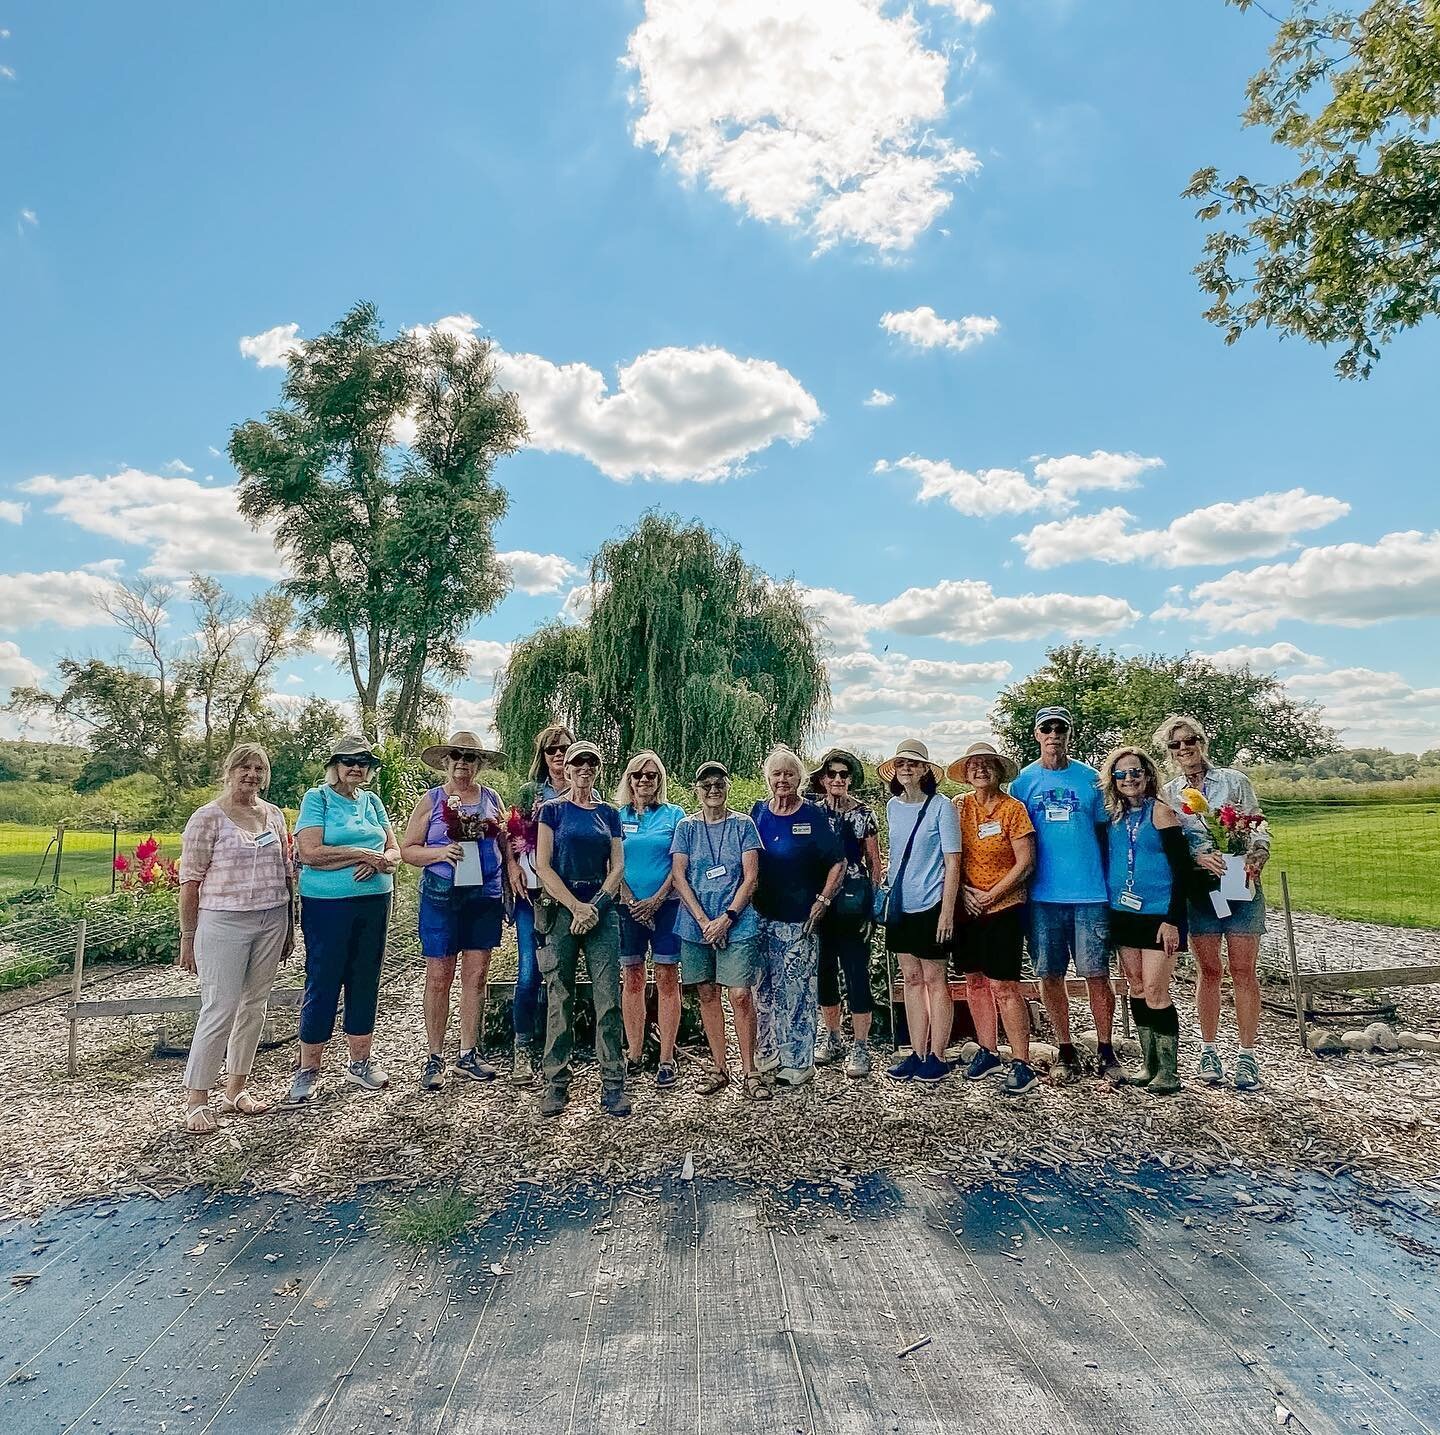 A couple weeks we had a terrific time hosting the local Master Gardener&rsquo;s chapter for a farm tour. We hope everyone enjoyed learning about the history of Deo Gloria Farm!